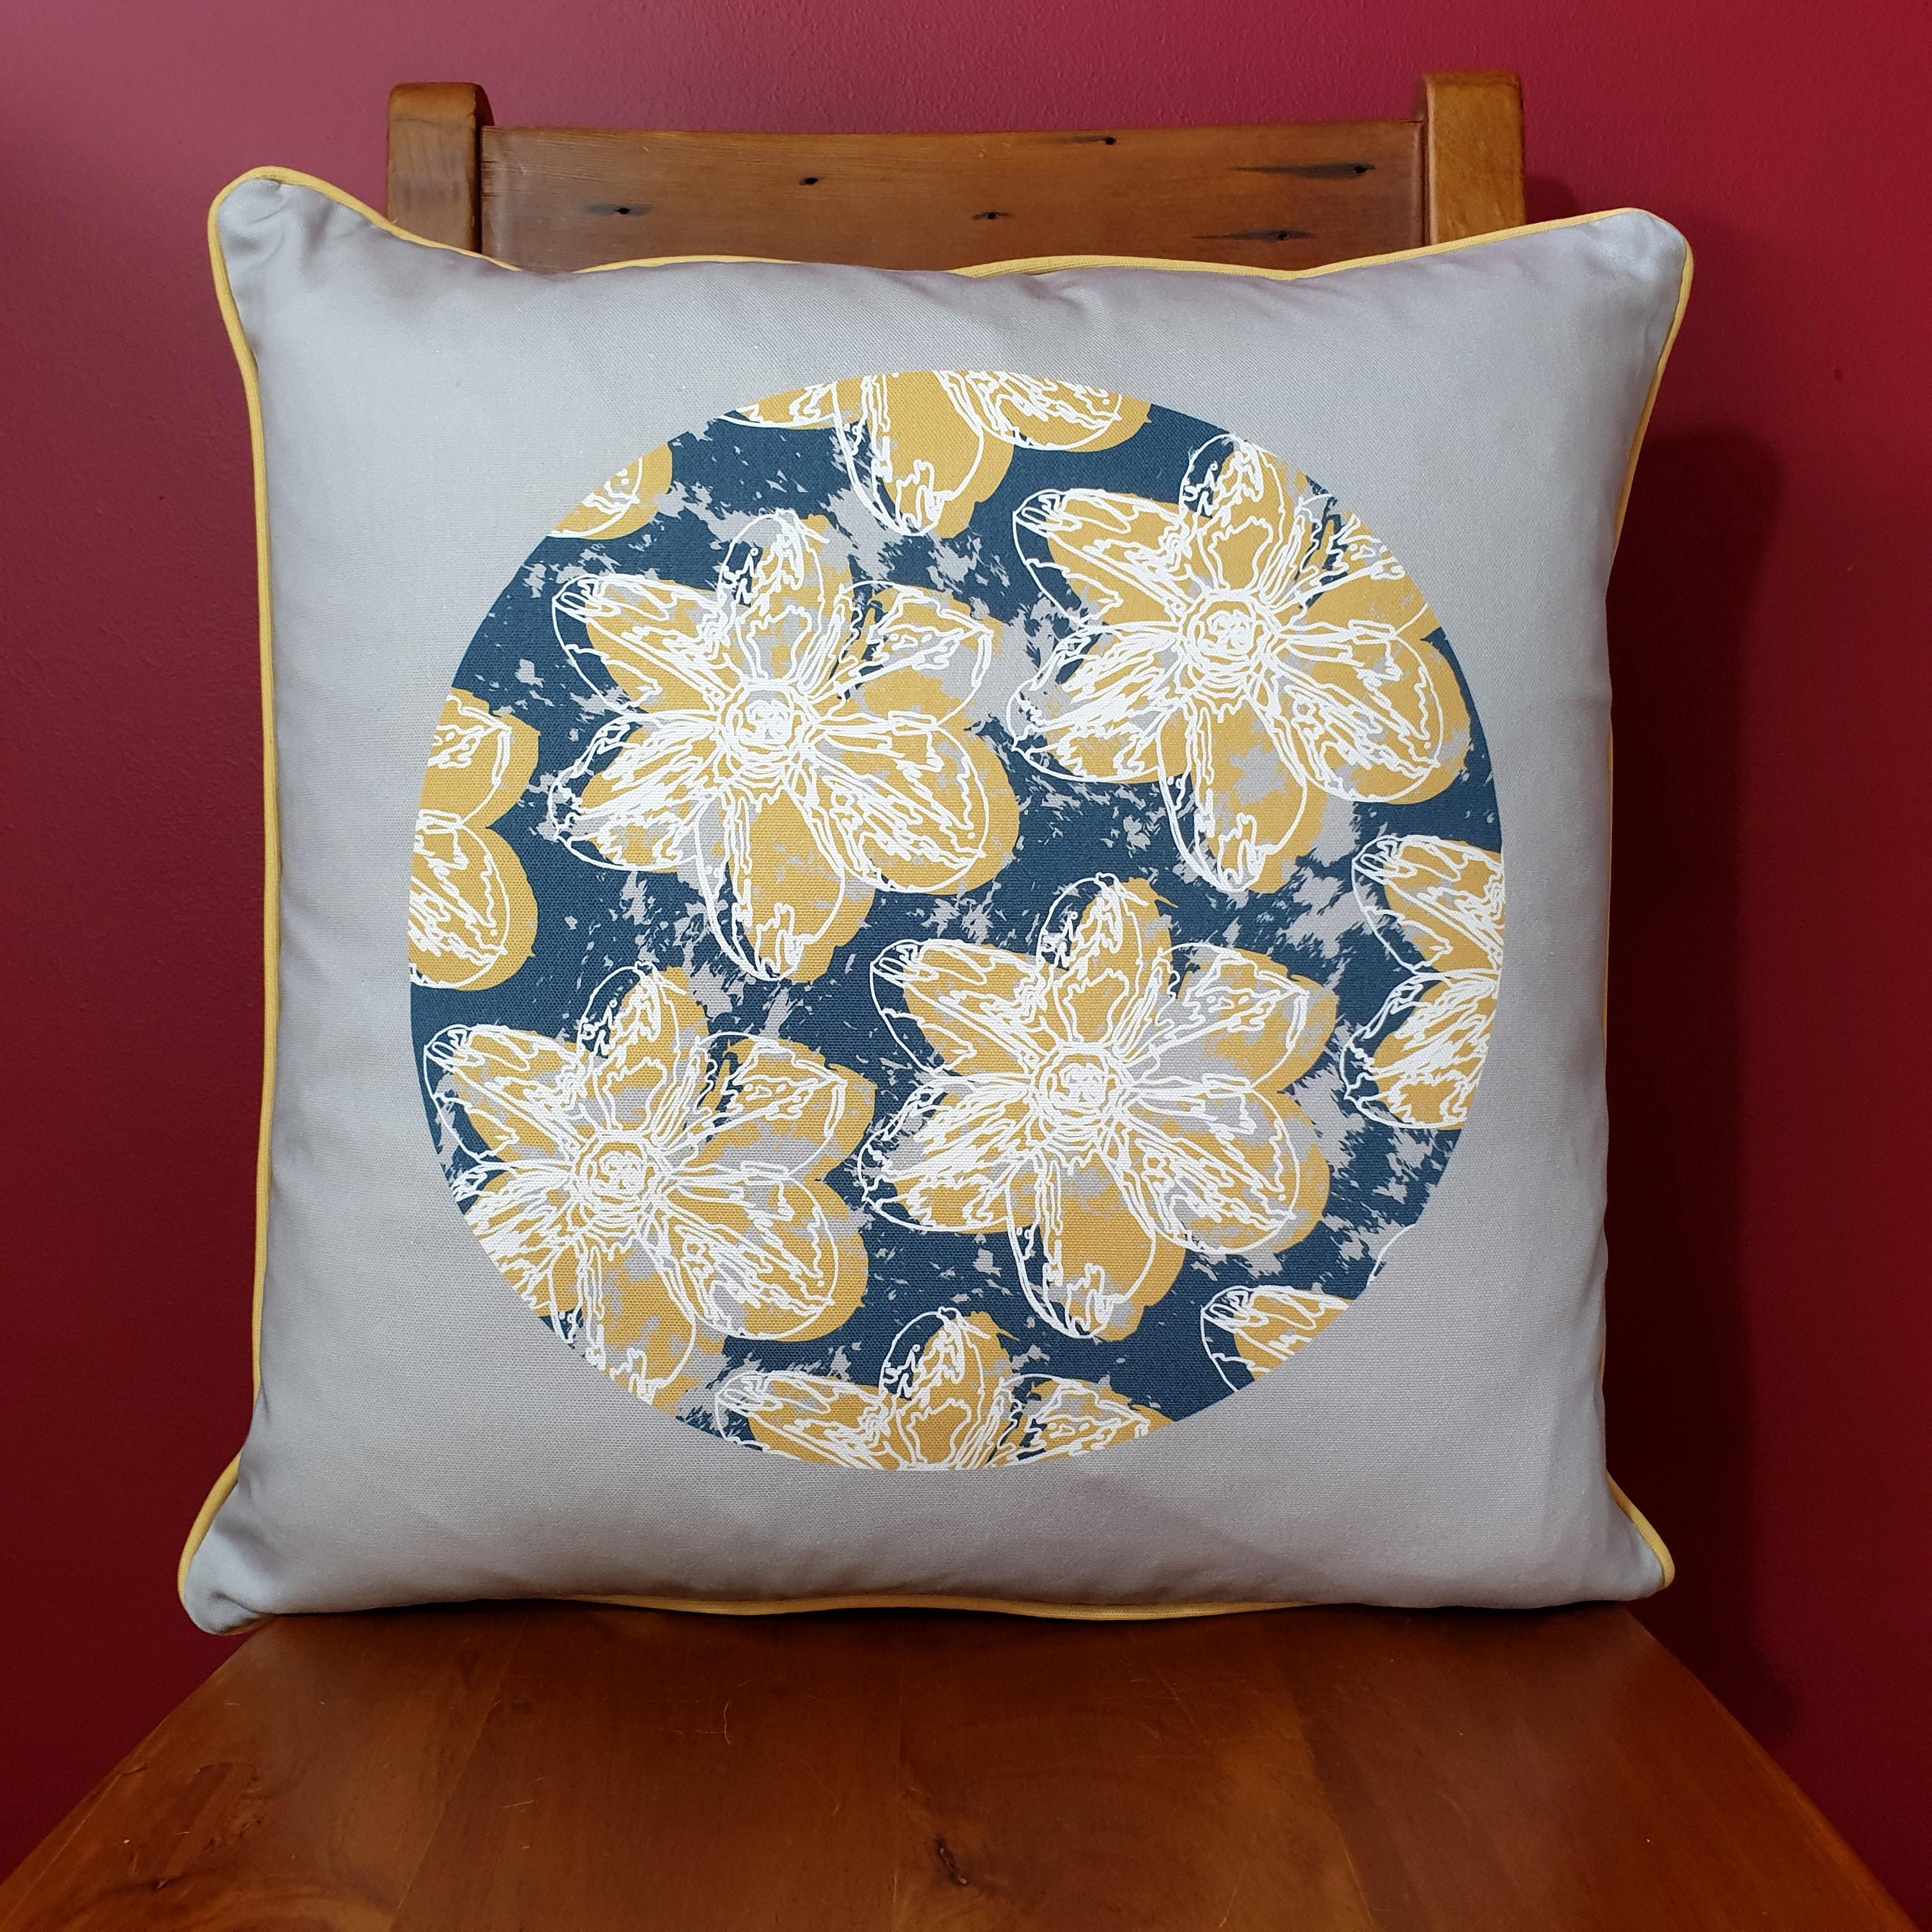 Double-sided 51cm square Flower Splash cushion designed by thetinkan. Mustard yellow narcissus flower with white traced outline and mustard yellow piping set in an oxford blue coloured circle with pale grey paint splashes and pale grey surround. Available with an optional luxury cushion inner pad. VIEW PRODUCT >>